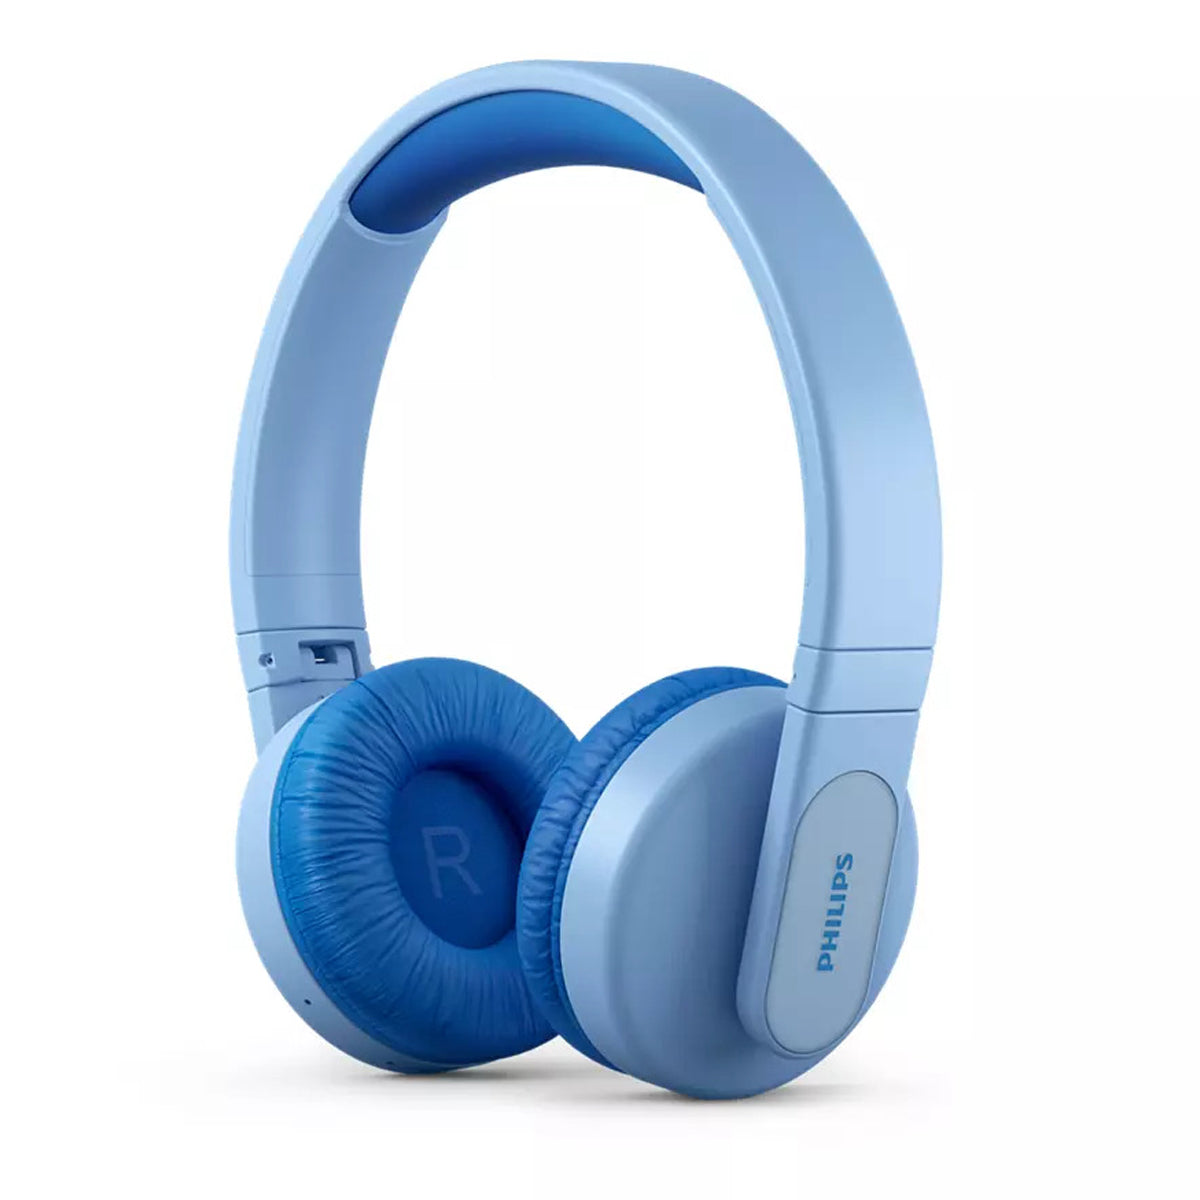 Philips TAK4206BL Wireless Bluetooth over ear headphones for children, colored LEDs, parental app control and 85dB volume limit, soft earcups